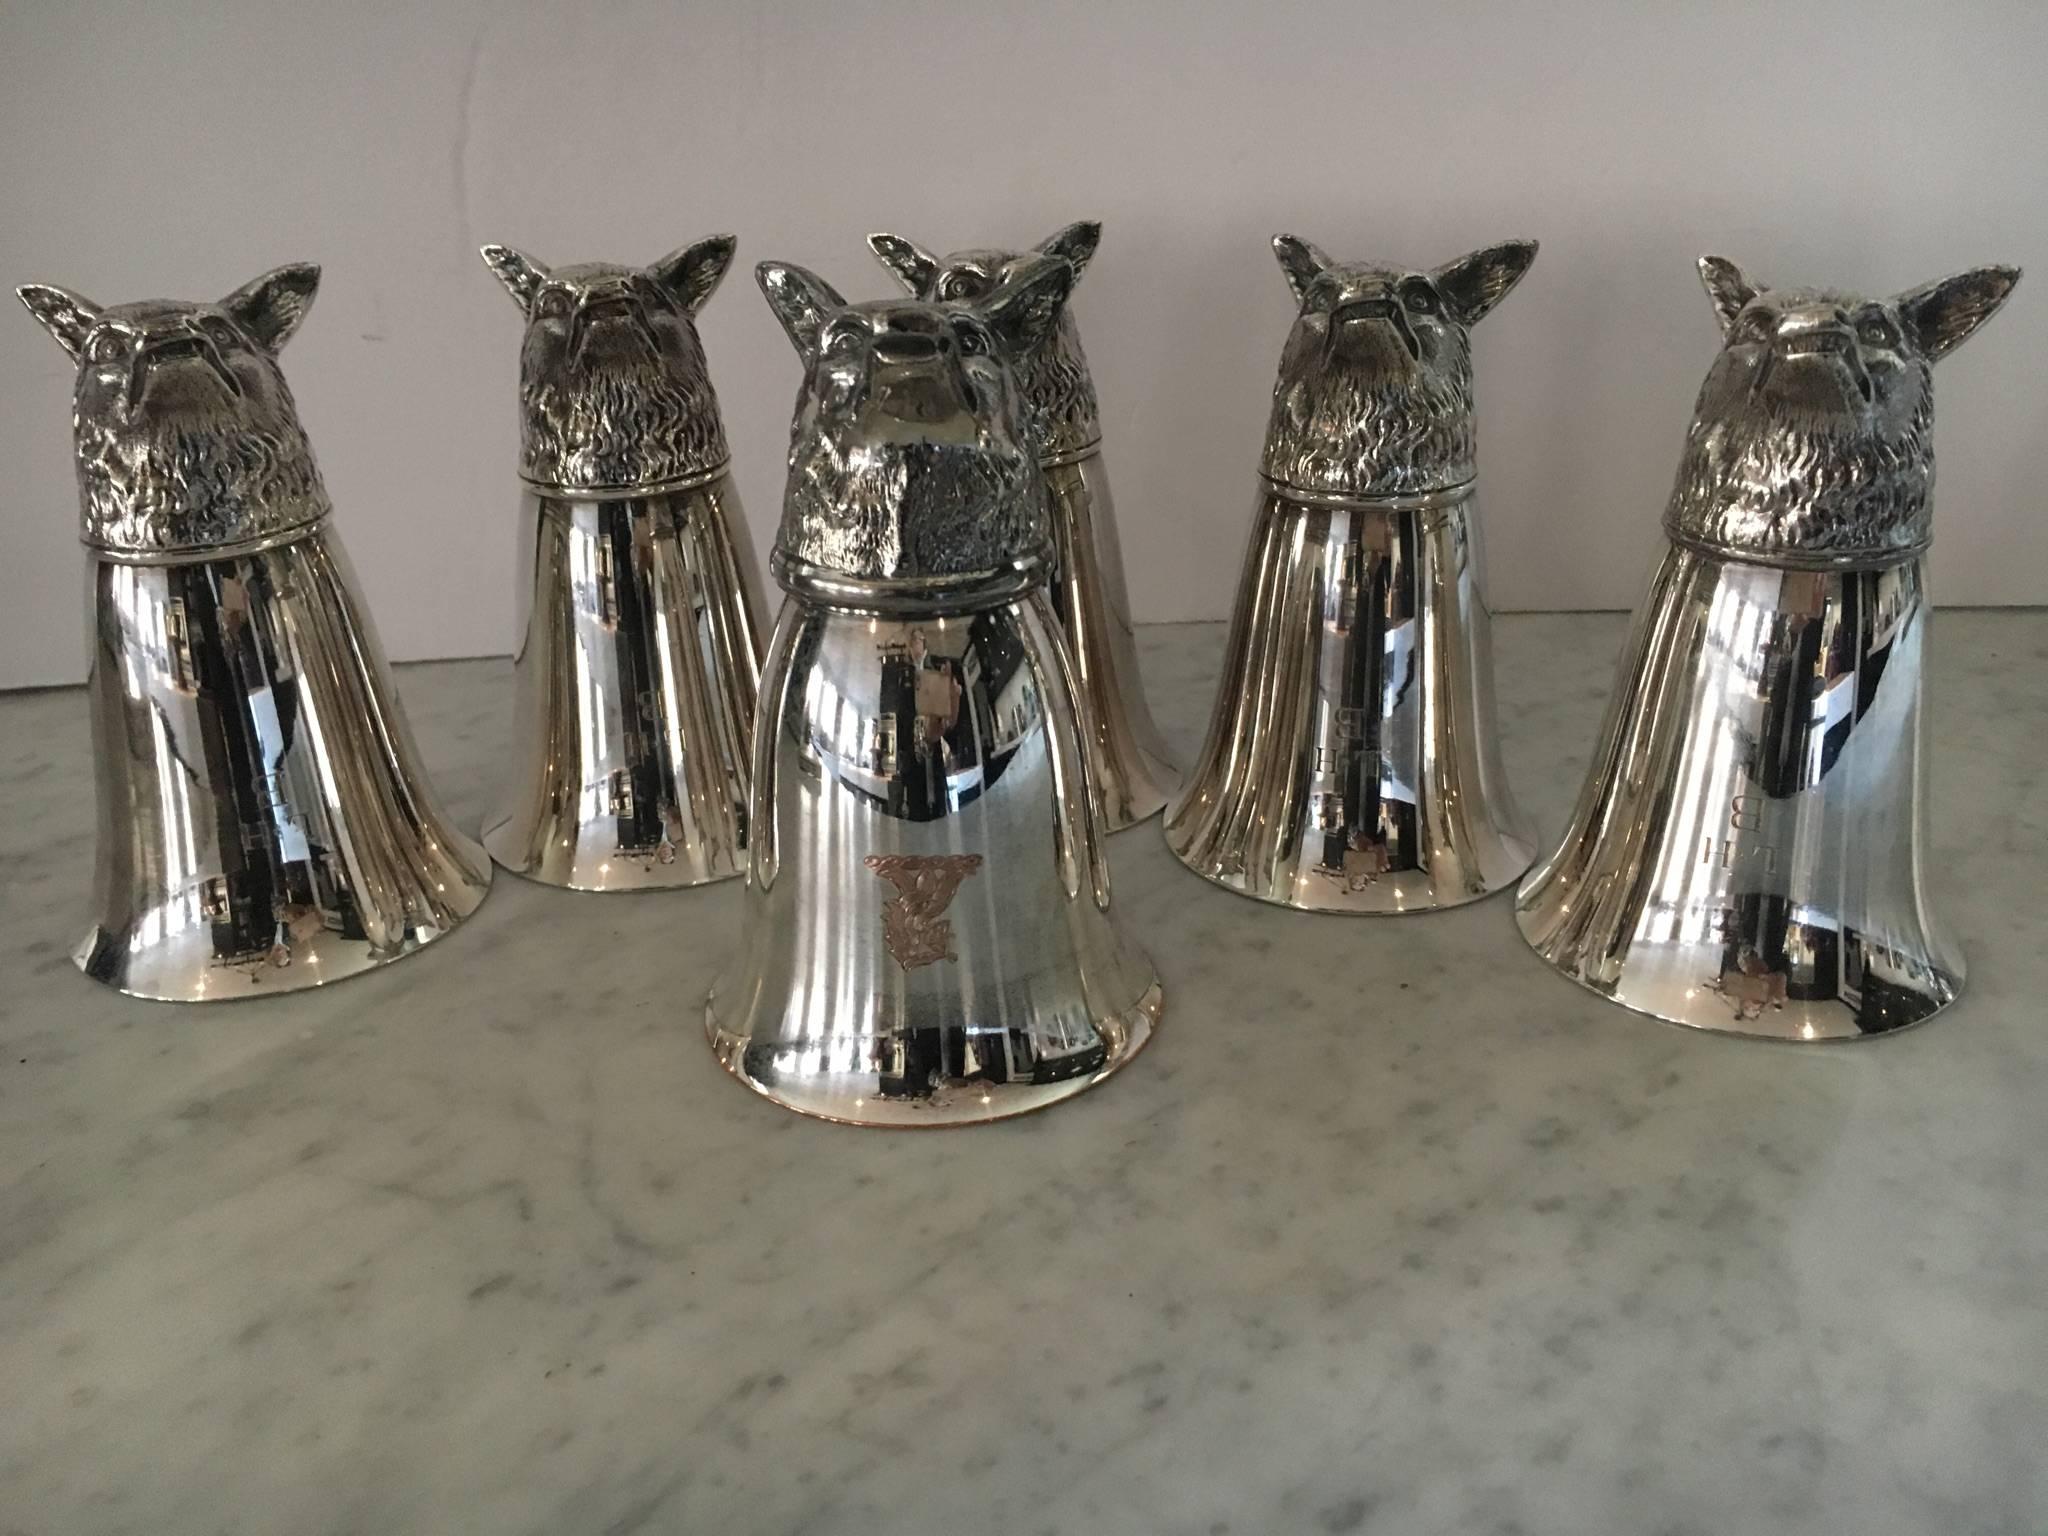 Handsome set of six Gucci style fox stirrup cups. Great tabletop objects and perfect for the hunt or parties. Cups flip over for serving drinks and are very sturdy. Five are monogrammed LHB and one has a family crest. One cup has a small copper spot